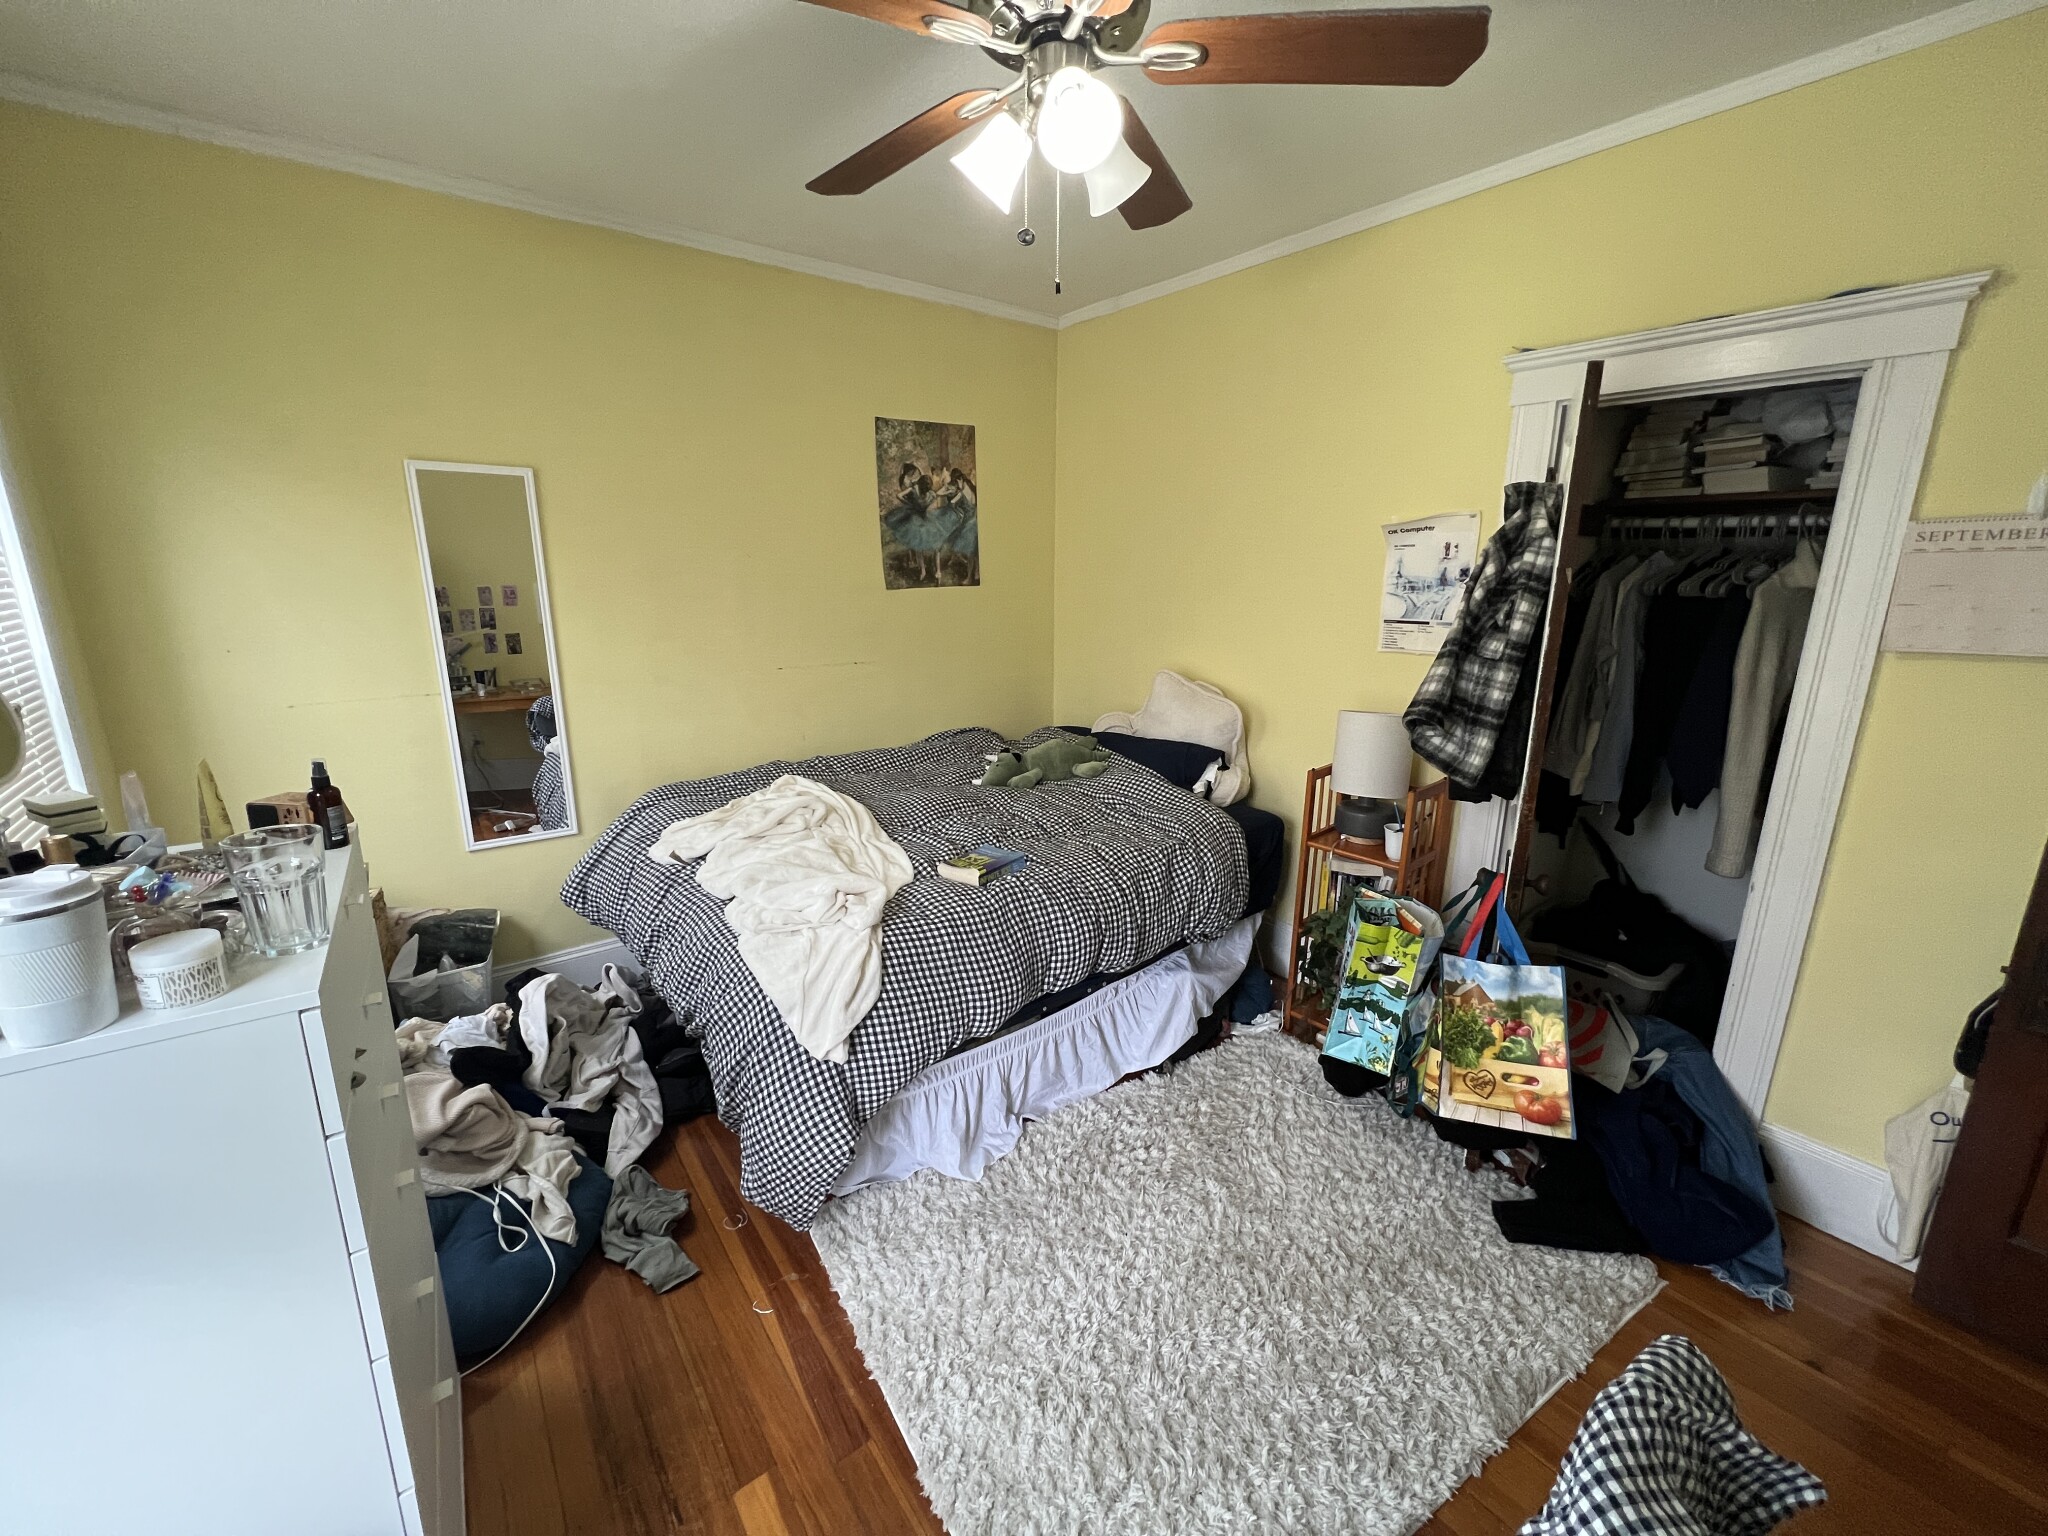 Photos of apartment on Holland St.,Somerville MA 02144